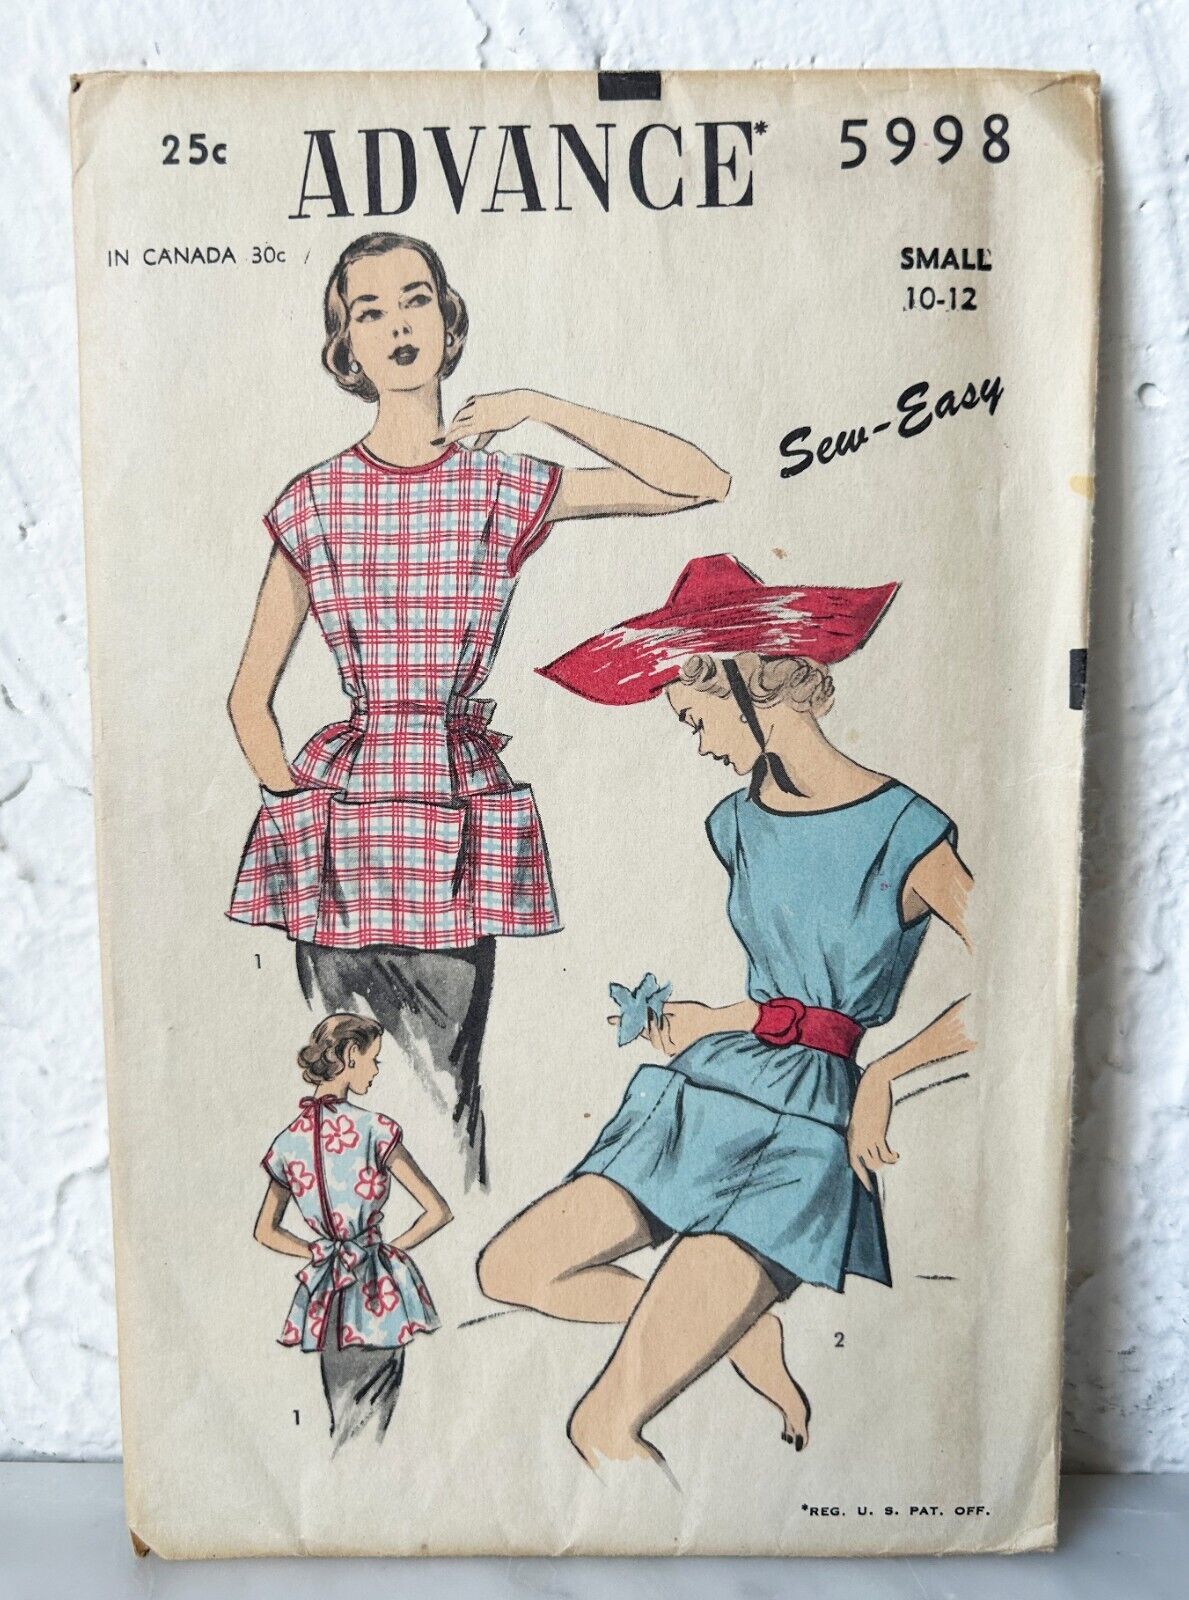 Primary image for Vintage Advance Misses Cobbler's Apron - Poncho Pattern 5998 Size Small 10-12